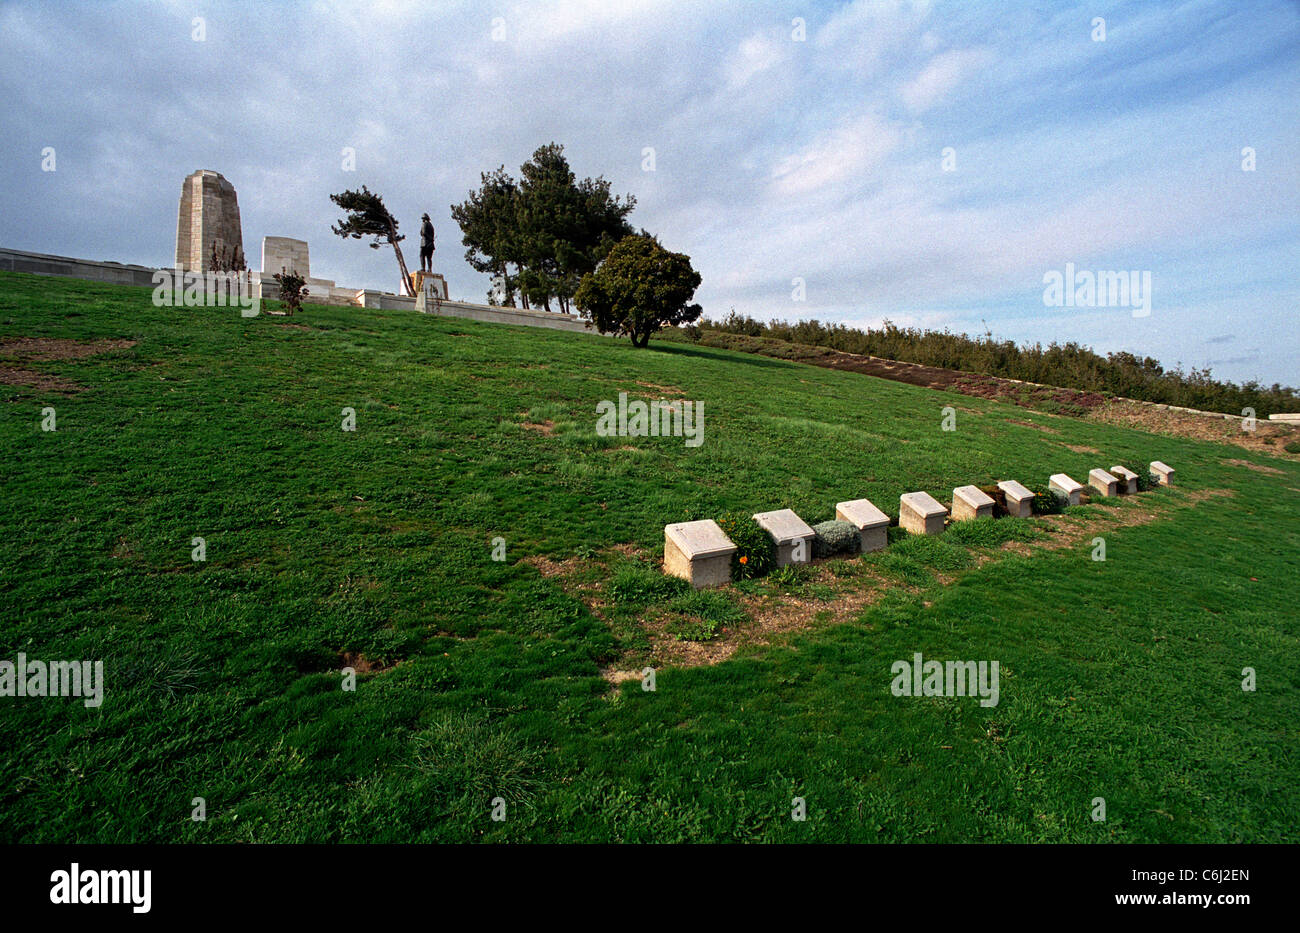 Chunuk Bair Cemetery,Gallipoli Battlefield Turkey from 1915 campaign. Maintained by Commonwealth War Graves Commission. Stock Photo